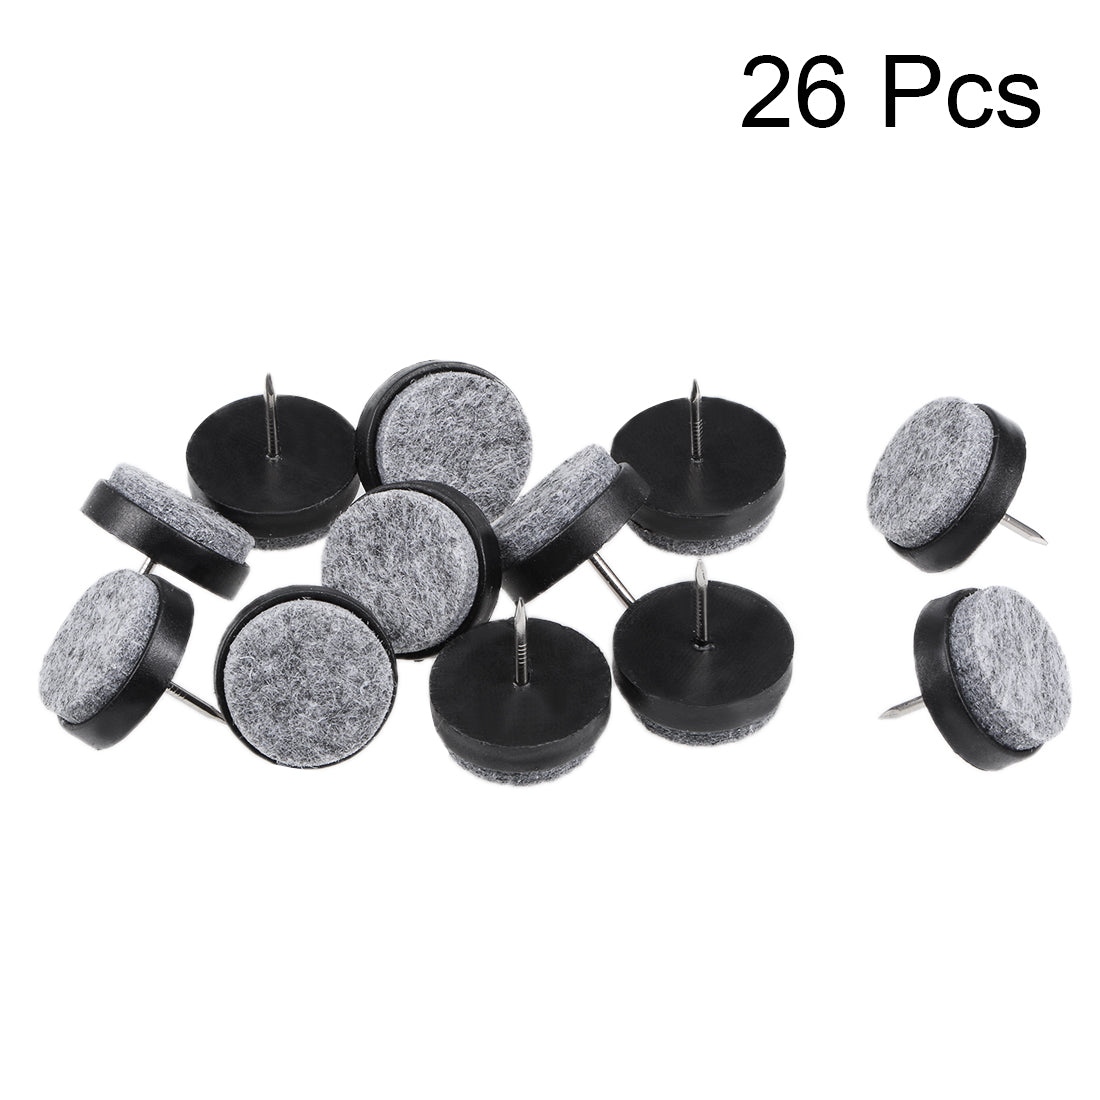 uxcell Uxcell Nail On Furniture Felt Pads Glide Chair Table Leg Protector 24mm Dia Black 26pcs